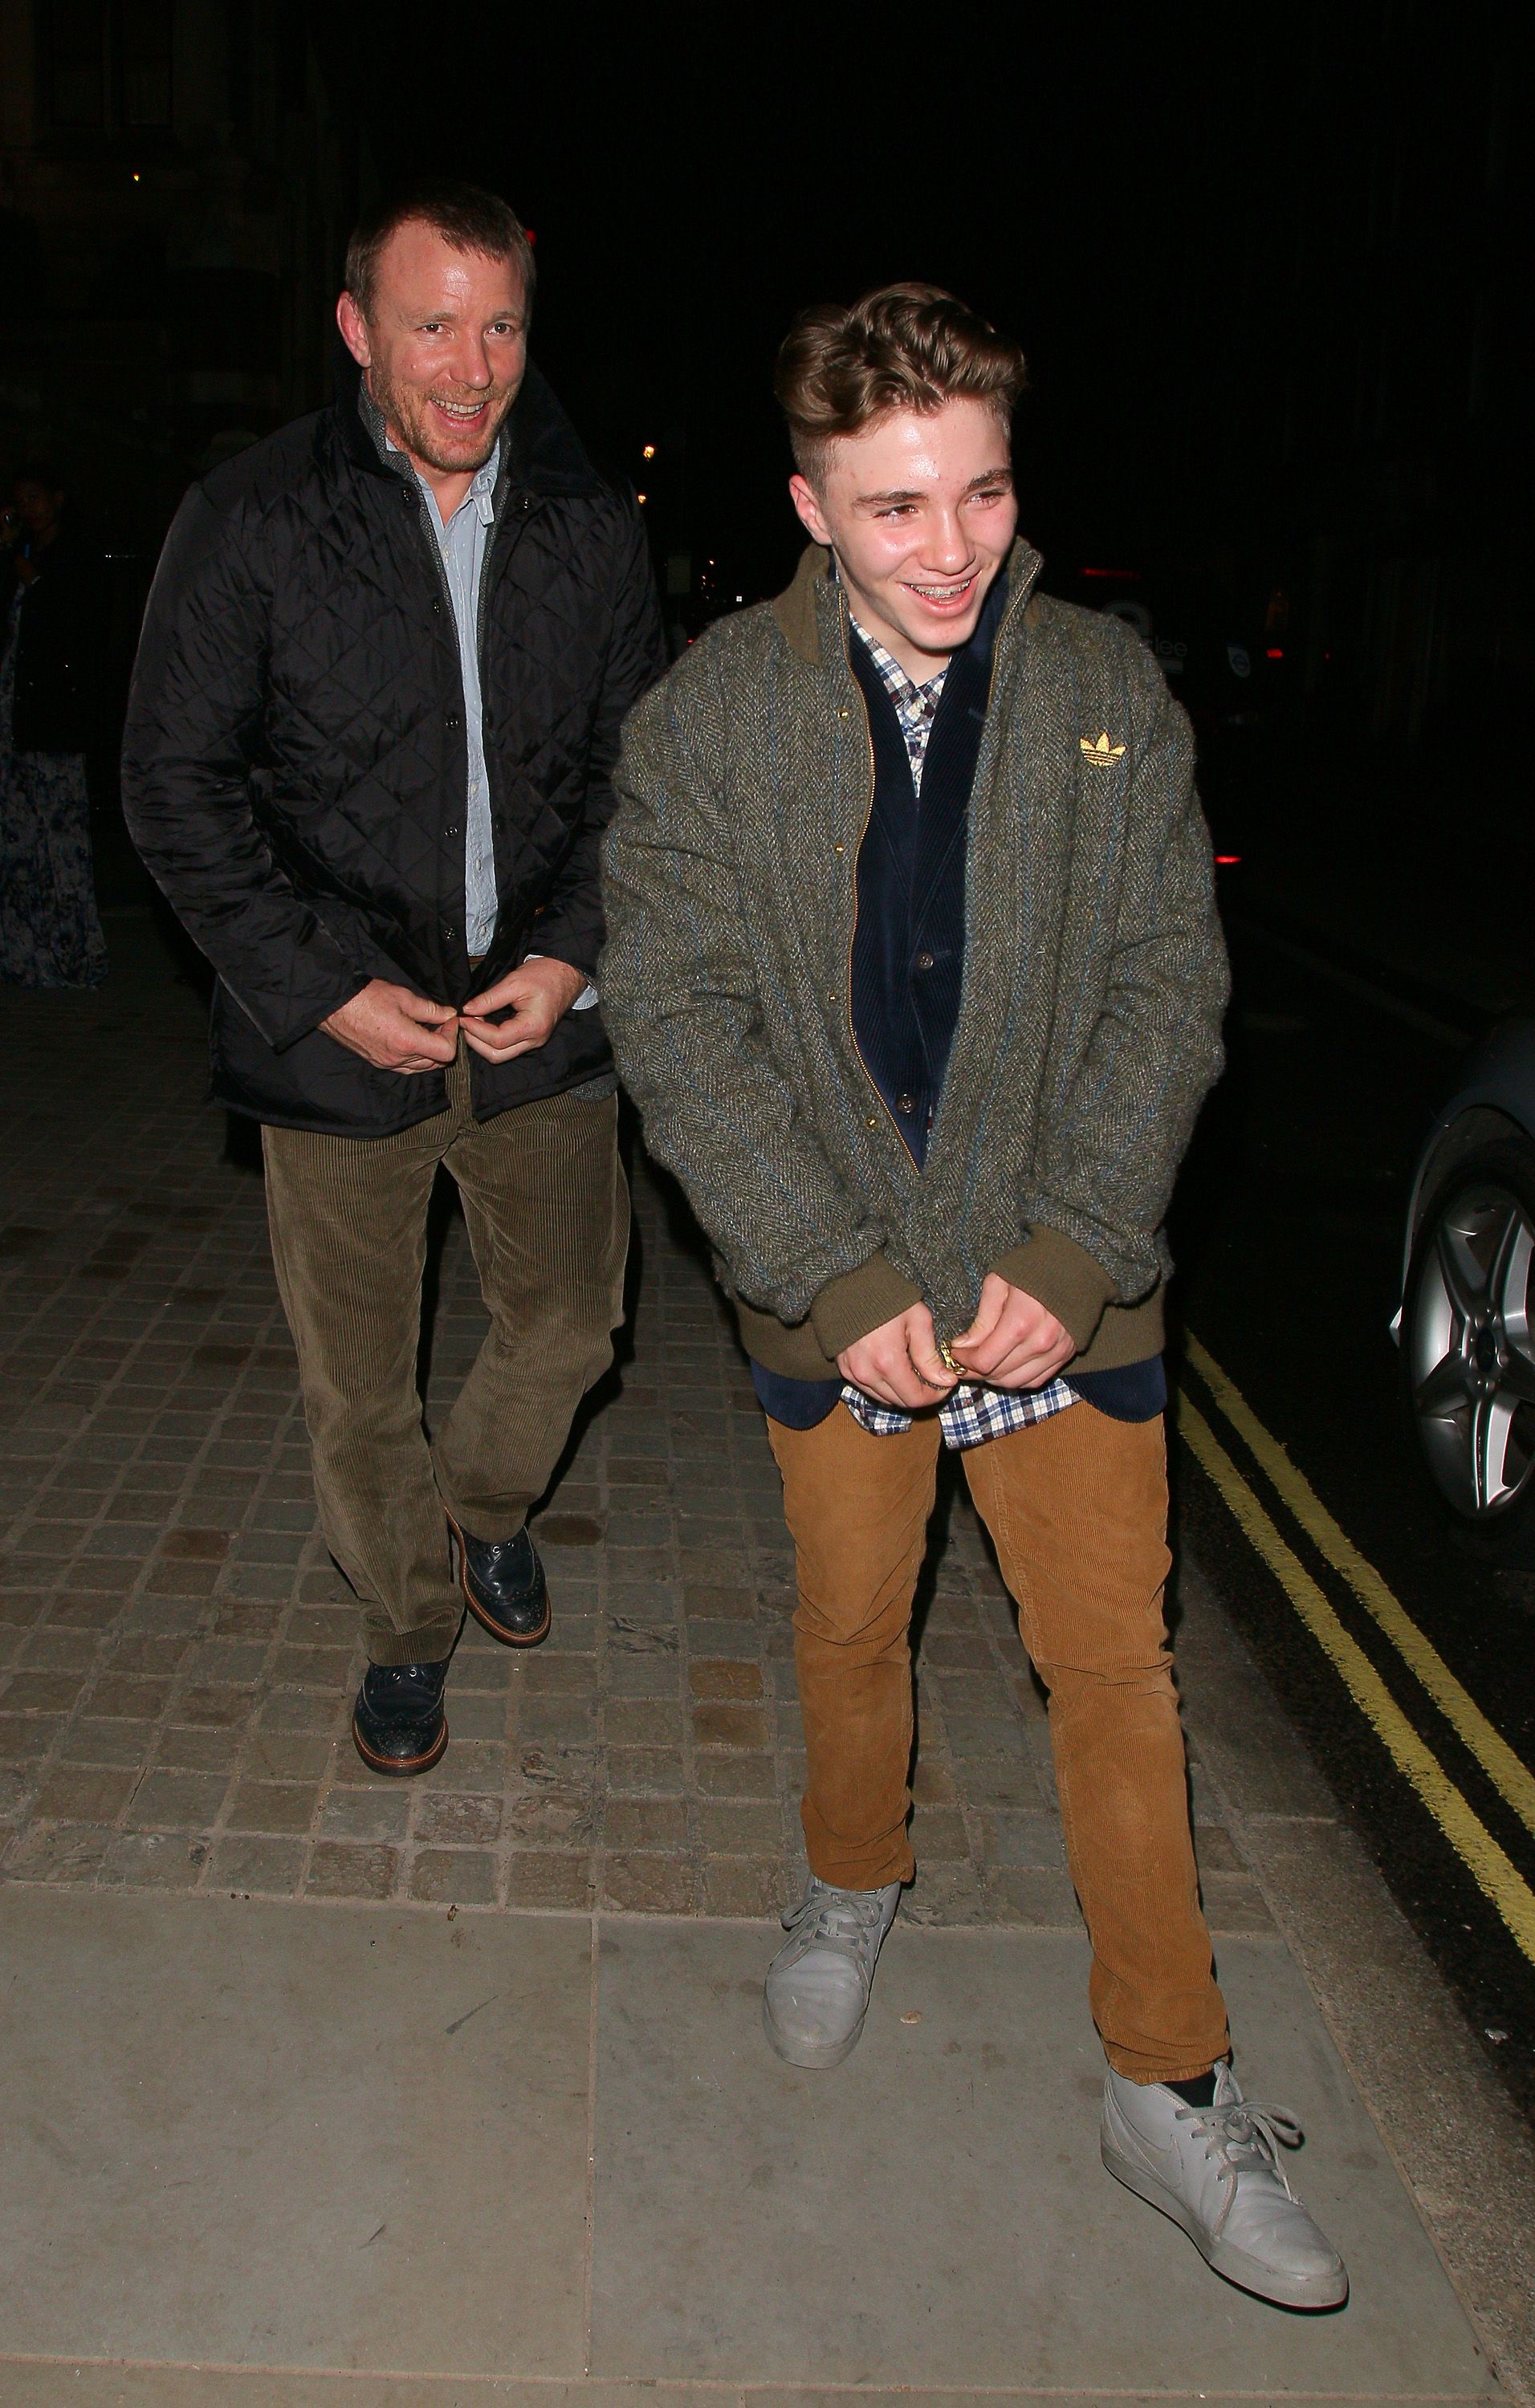 Guy Ritchie and Rocco Ritchie during London Fashion Week in February 2014 in London, England | Source: Getty Images